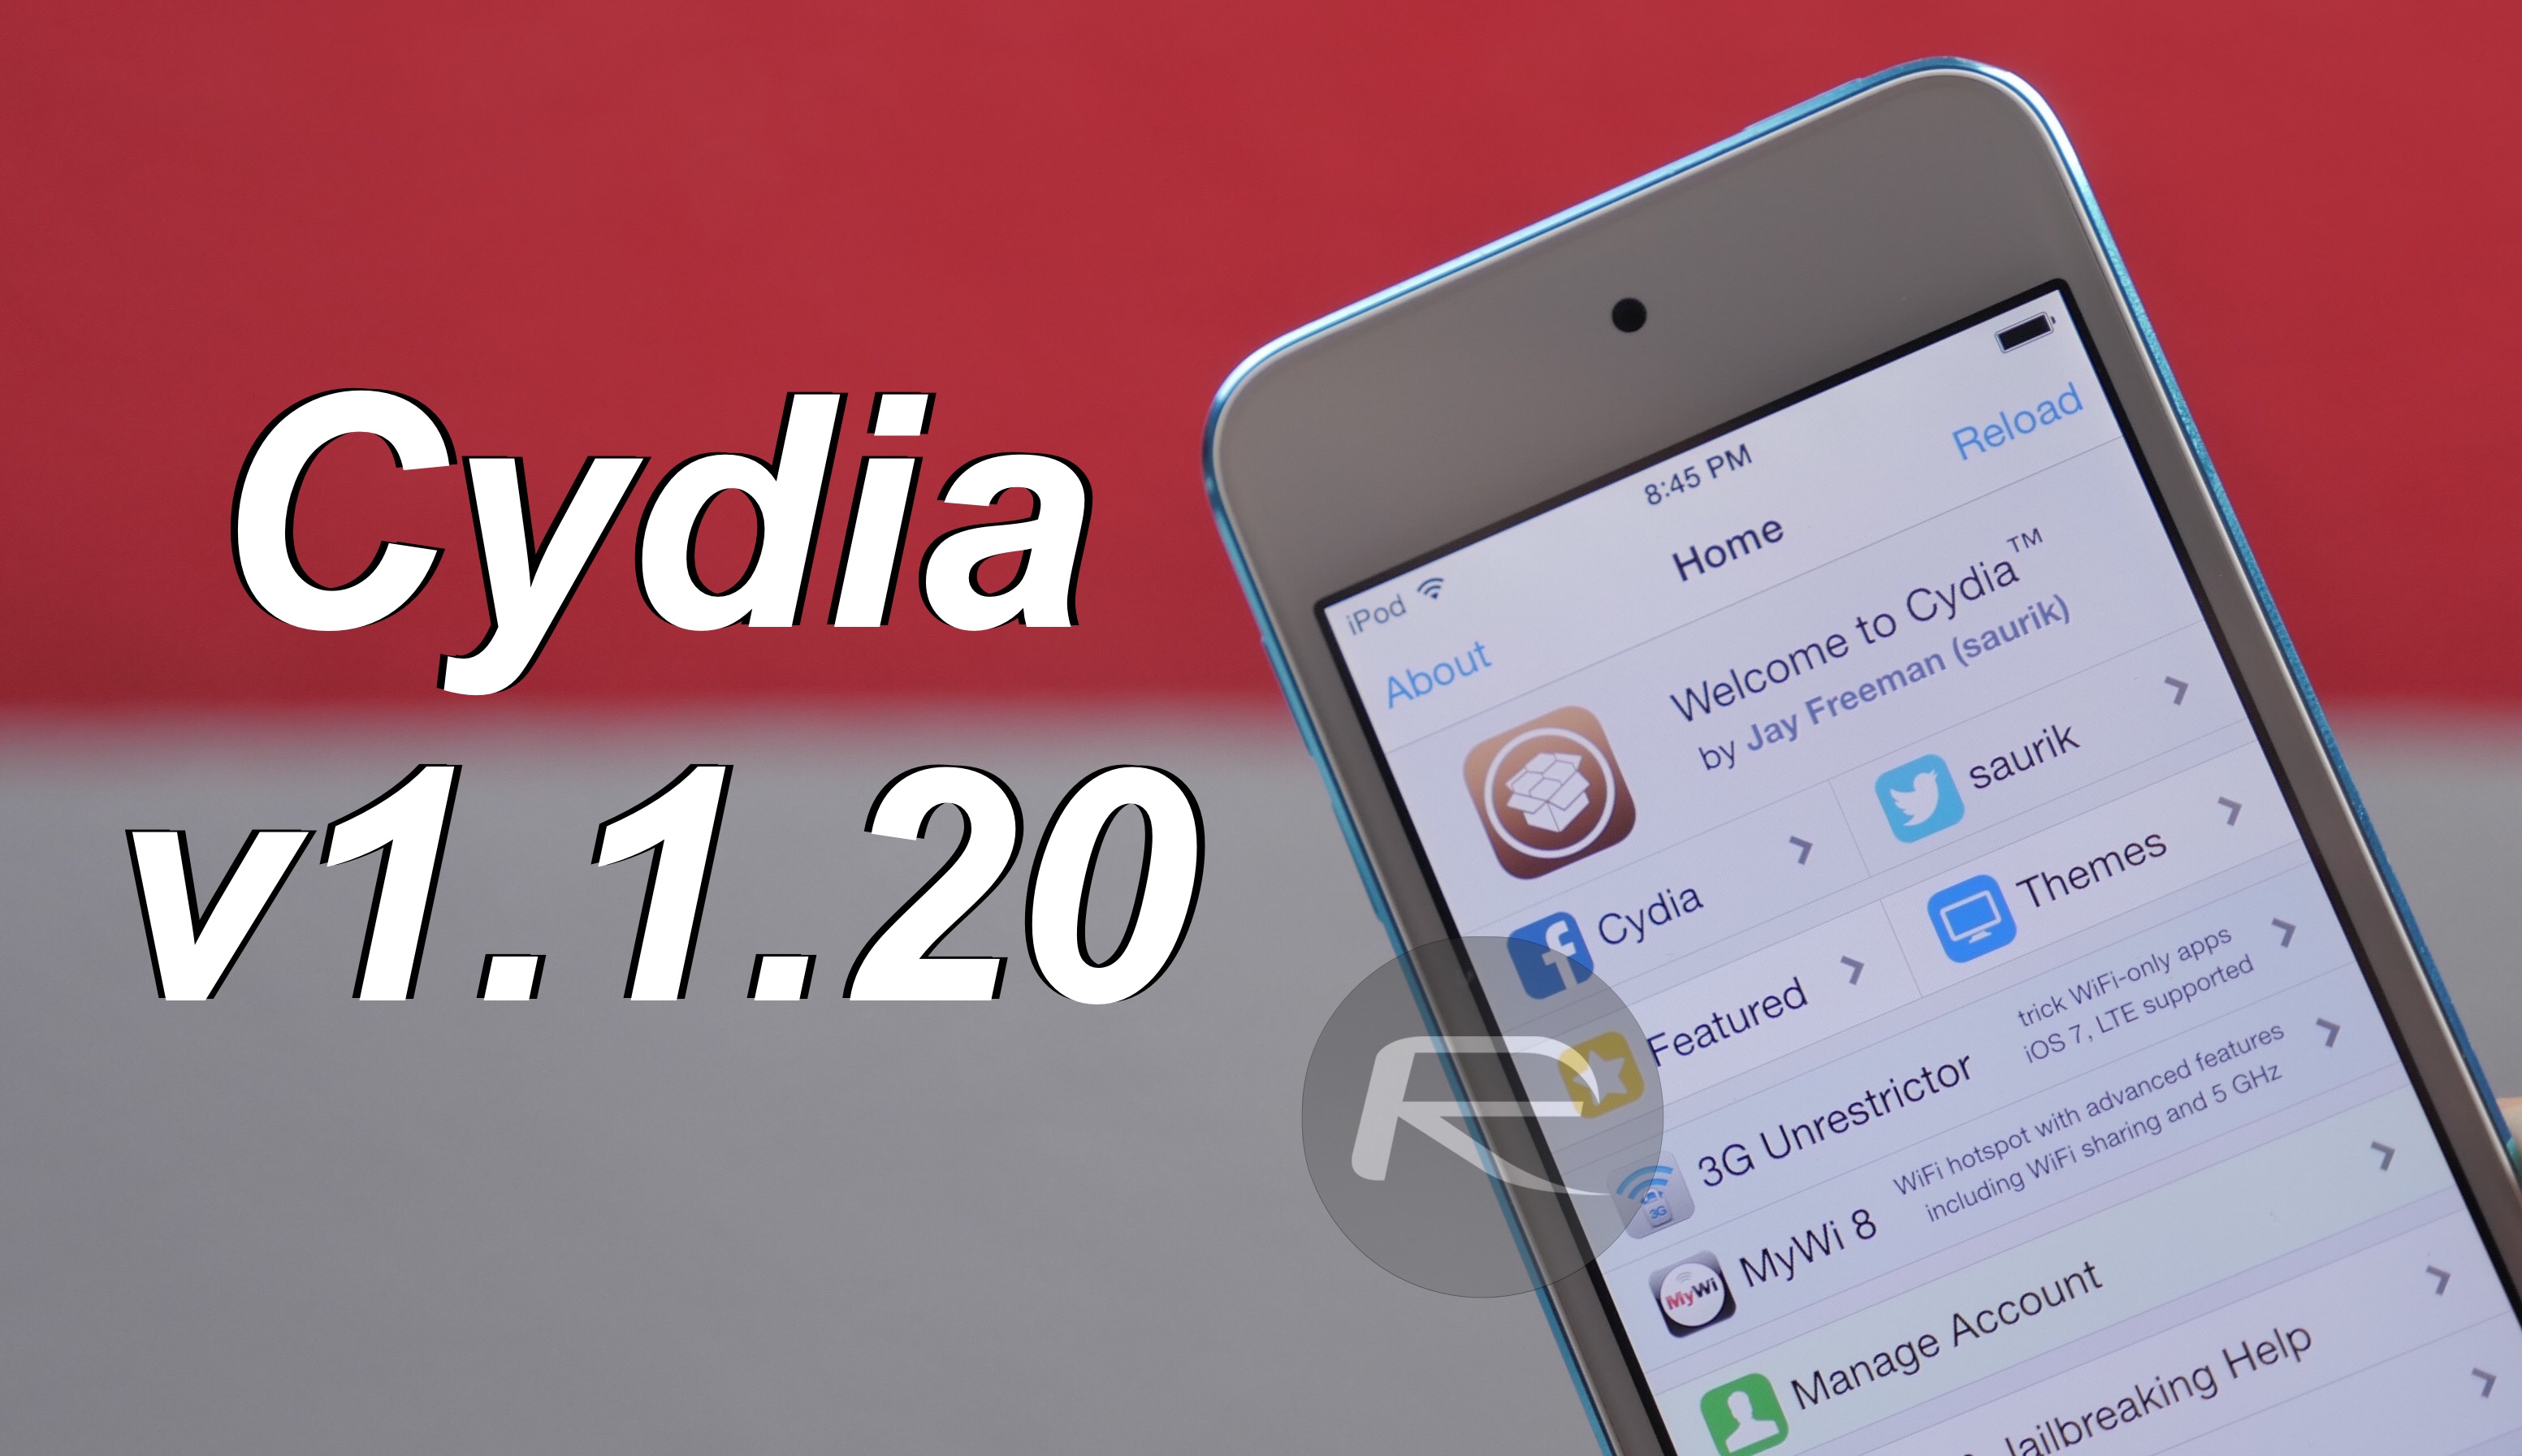 Cydia 1.1.20 Released: Supports iTunes Backup For Sources List, Bug Fixes, More